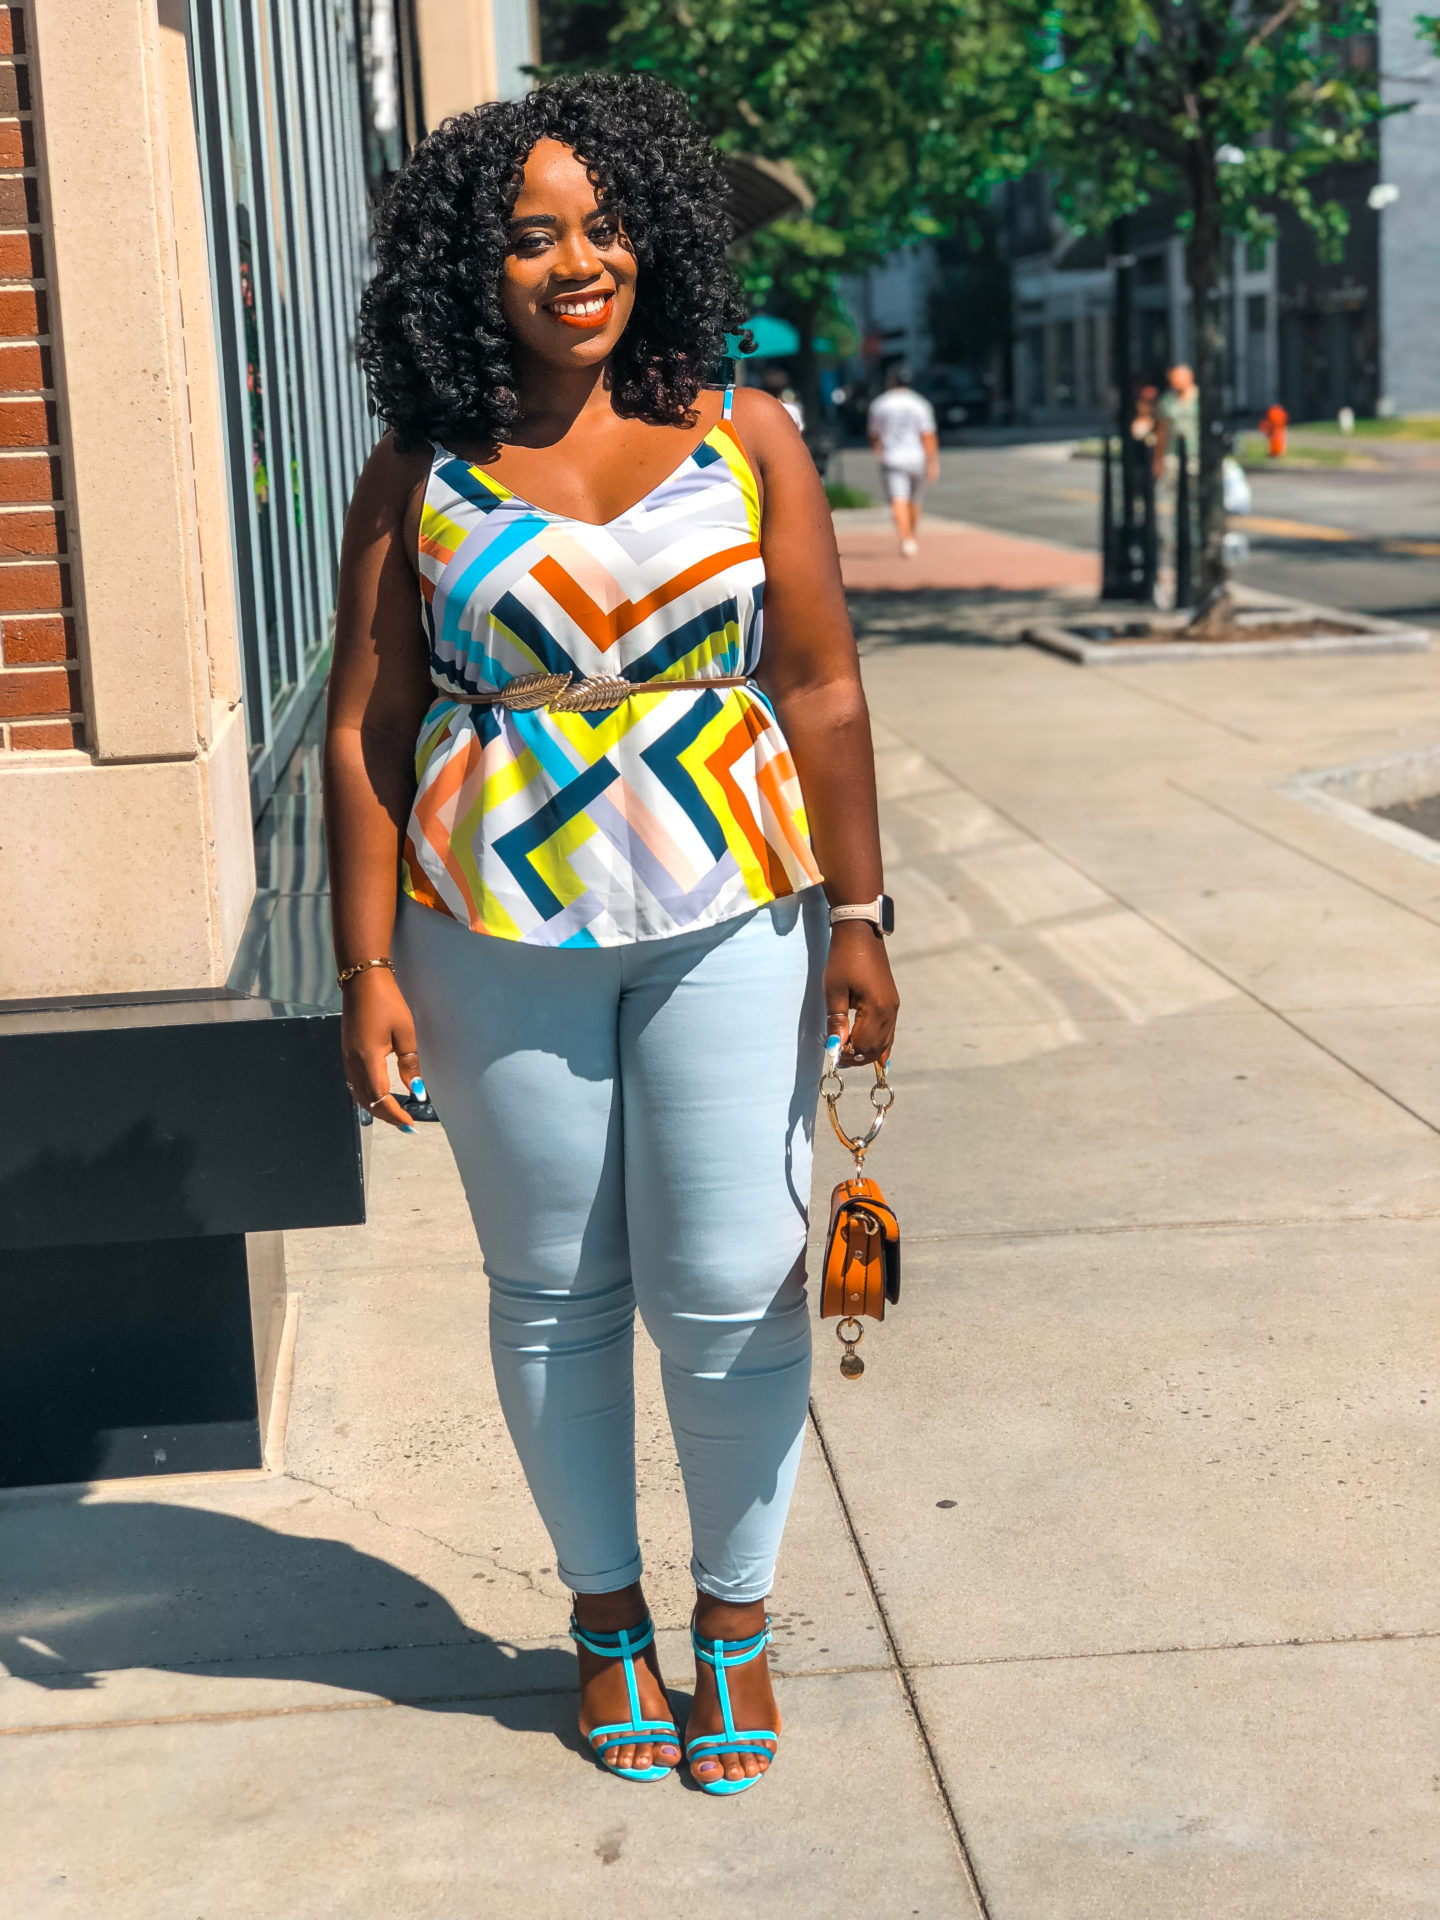 African, African Blogger, Boston Blogger, African Woman, African cocktail, Africancocktail, Forever 21, Curvy Woman, Curvy Blogger, Curvy Girl